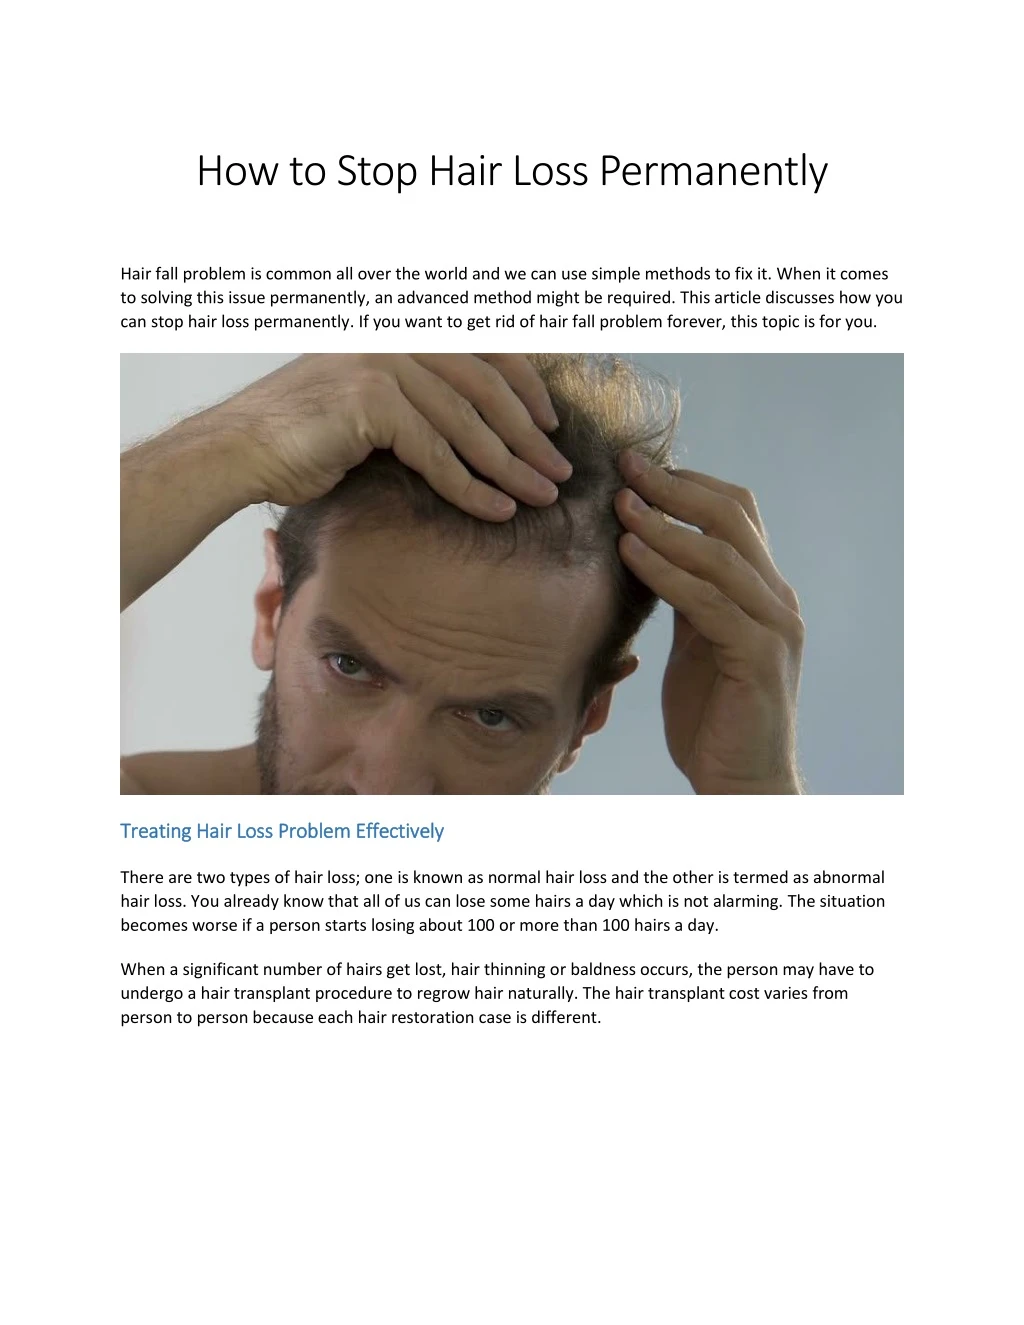 how to stop hair loss permanently